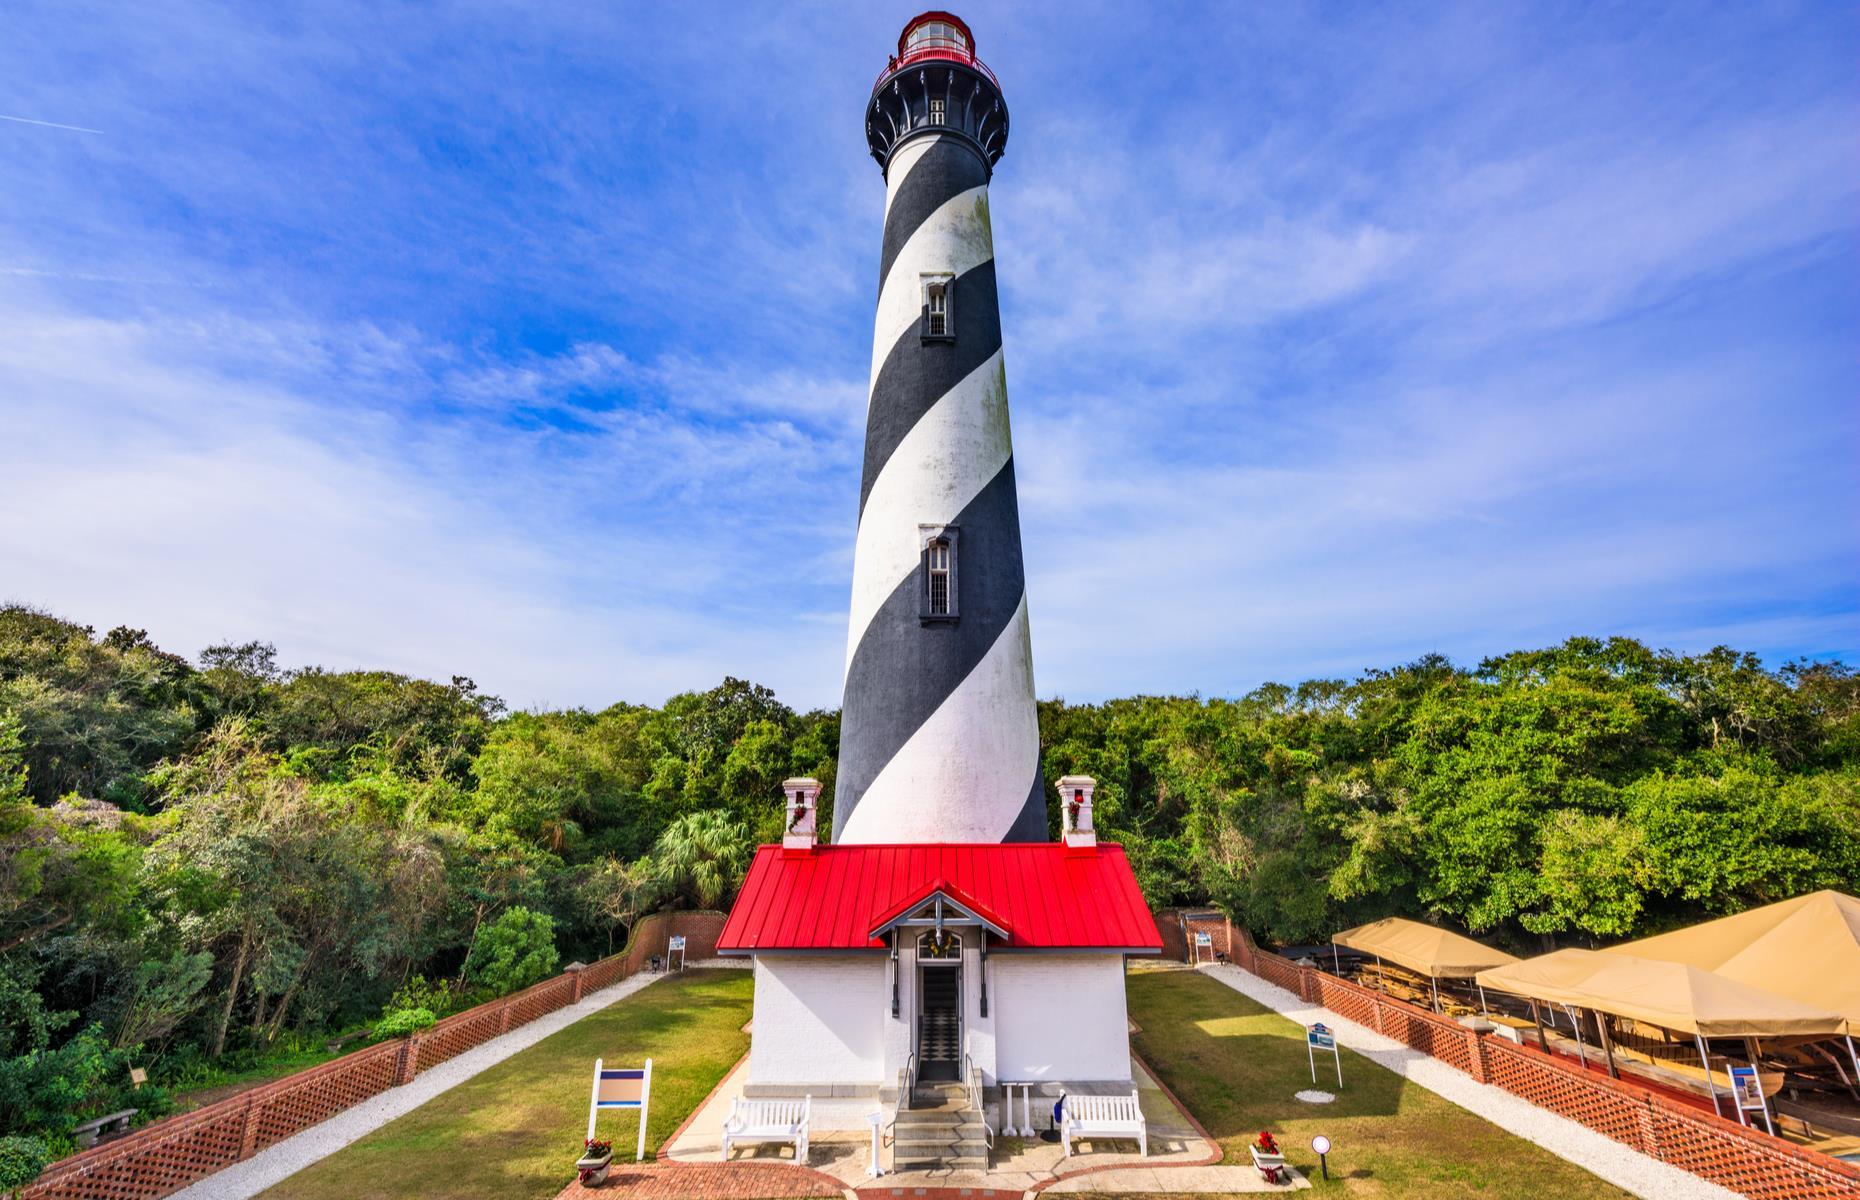 <p><a href="https://www.staugustinelighthouse.org/">This striking black-and-white beacon</a> might not seem particularly creepy, especially when you consider it's in sunny St Augustine. But the lighthouse has a somber past and has even made an appearance on reality series <em>Ghost Hunters</em>. It's said to be haunted by Joseph Andreu, a 19th-century keeper who fell to his death while on watch. Three young girls, including two daughters of 19th-century superintendent Hezekiah Pittee, also died while playing nearby: locals say their playful spirits still haunt the site.</p>  <p><a href="https://www.loveexploring.com/galleries/87044/americas-most-beautiful-lighthouses-you-can-visit?page=1"><strong>These are America's most beautiful lighthouses</strong></a></p>